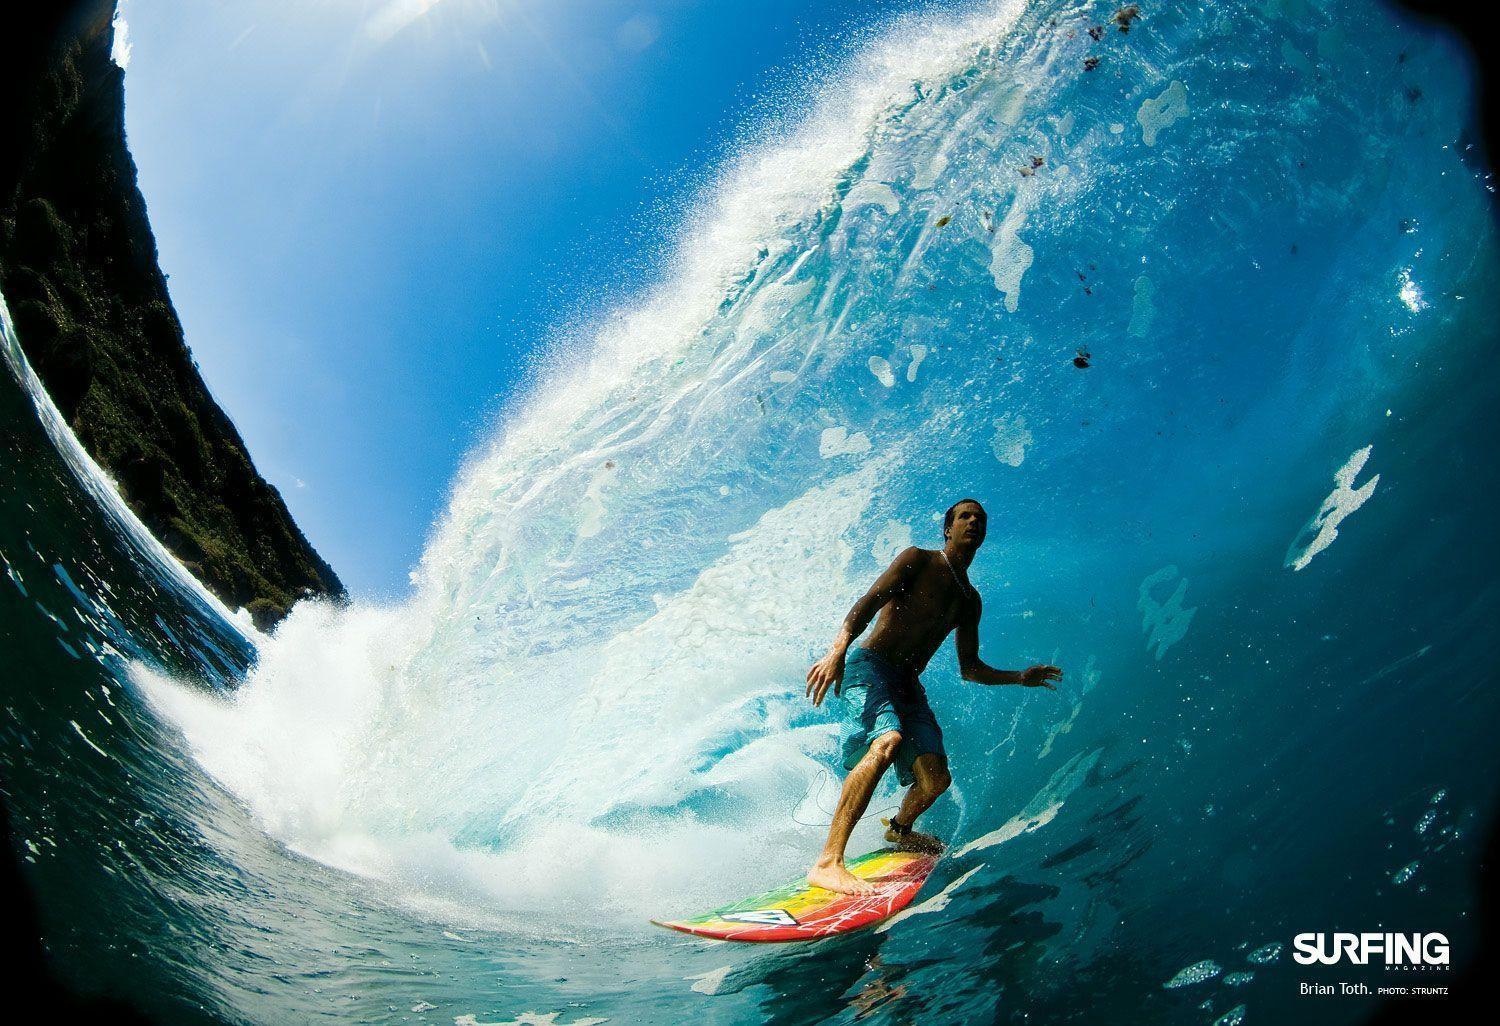 Desktop Wallpaper Awesome Photo From Surfing Magazine